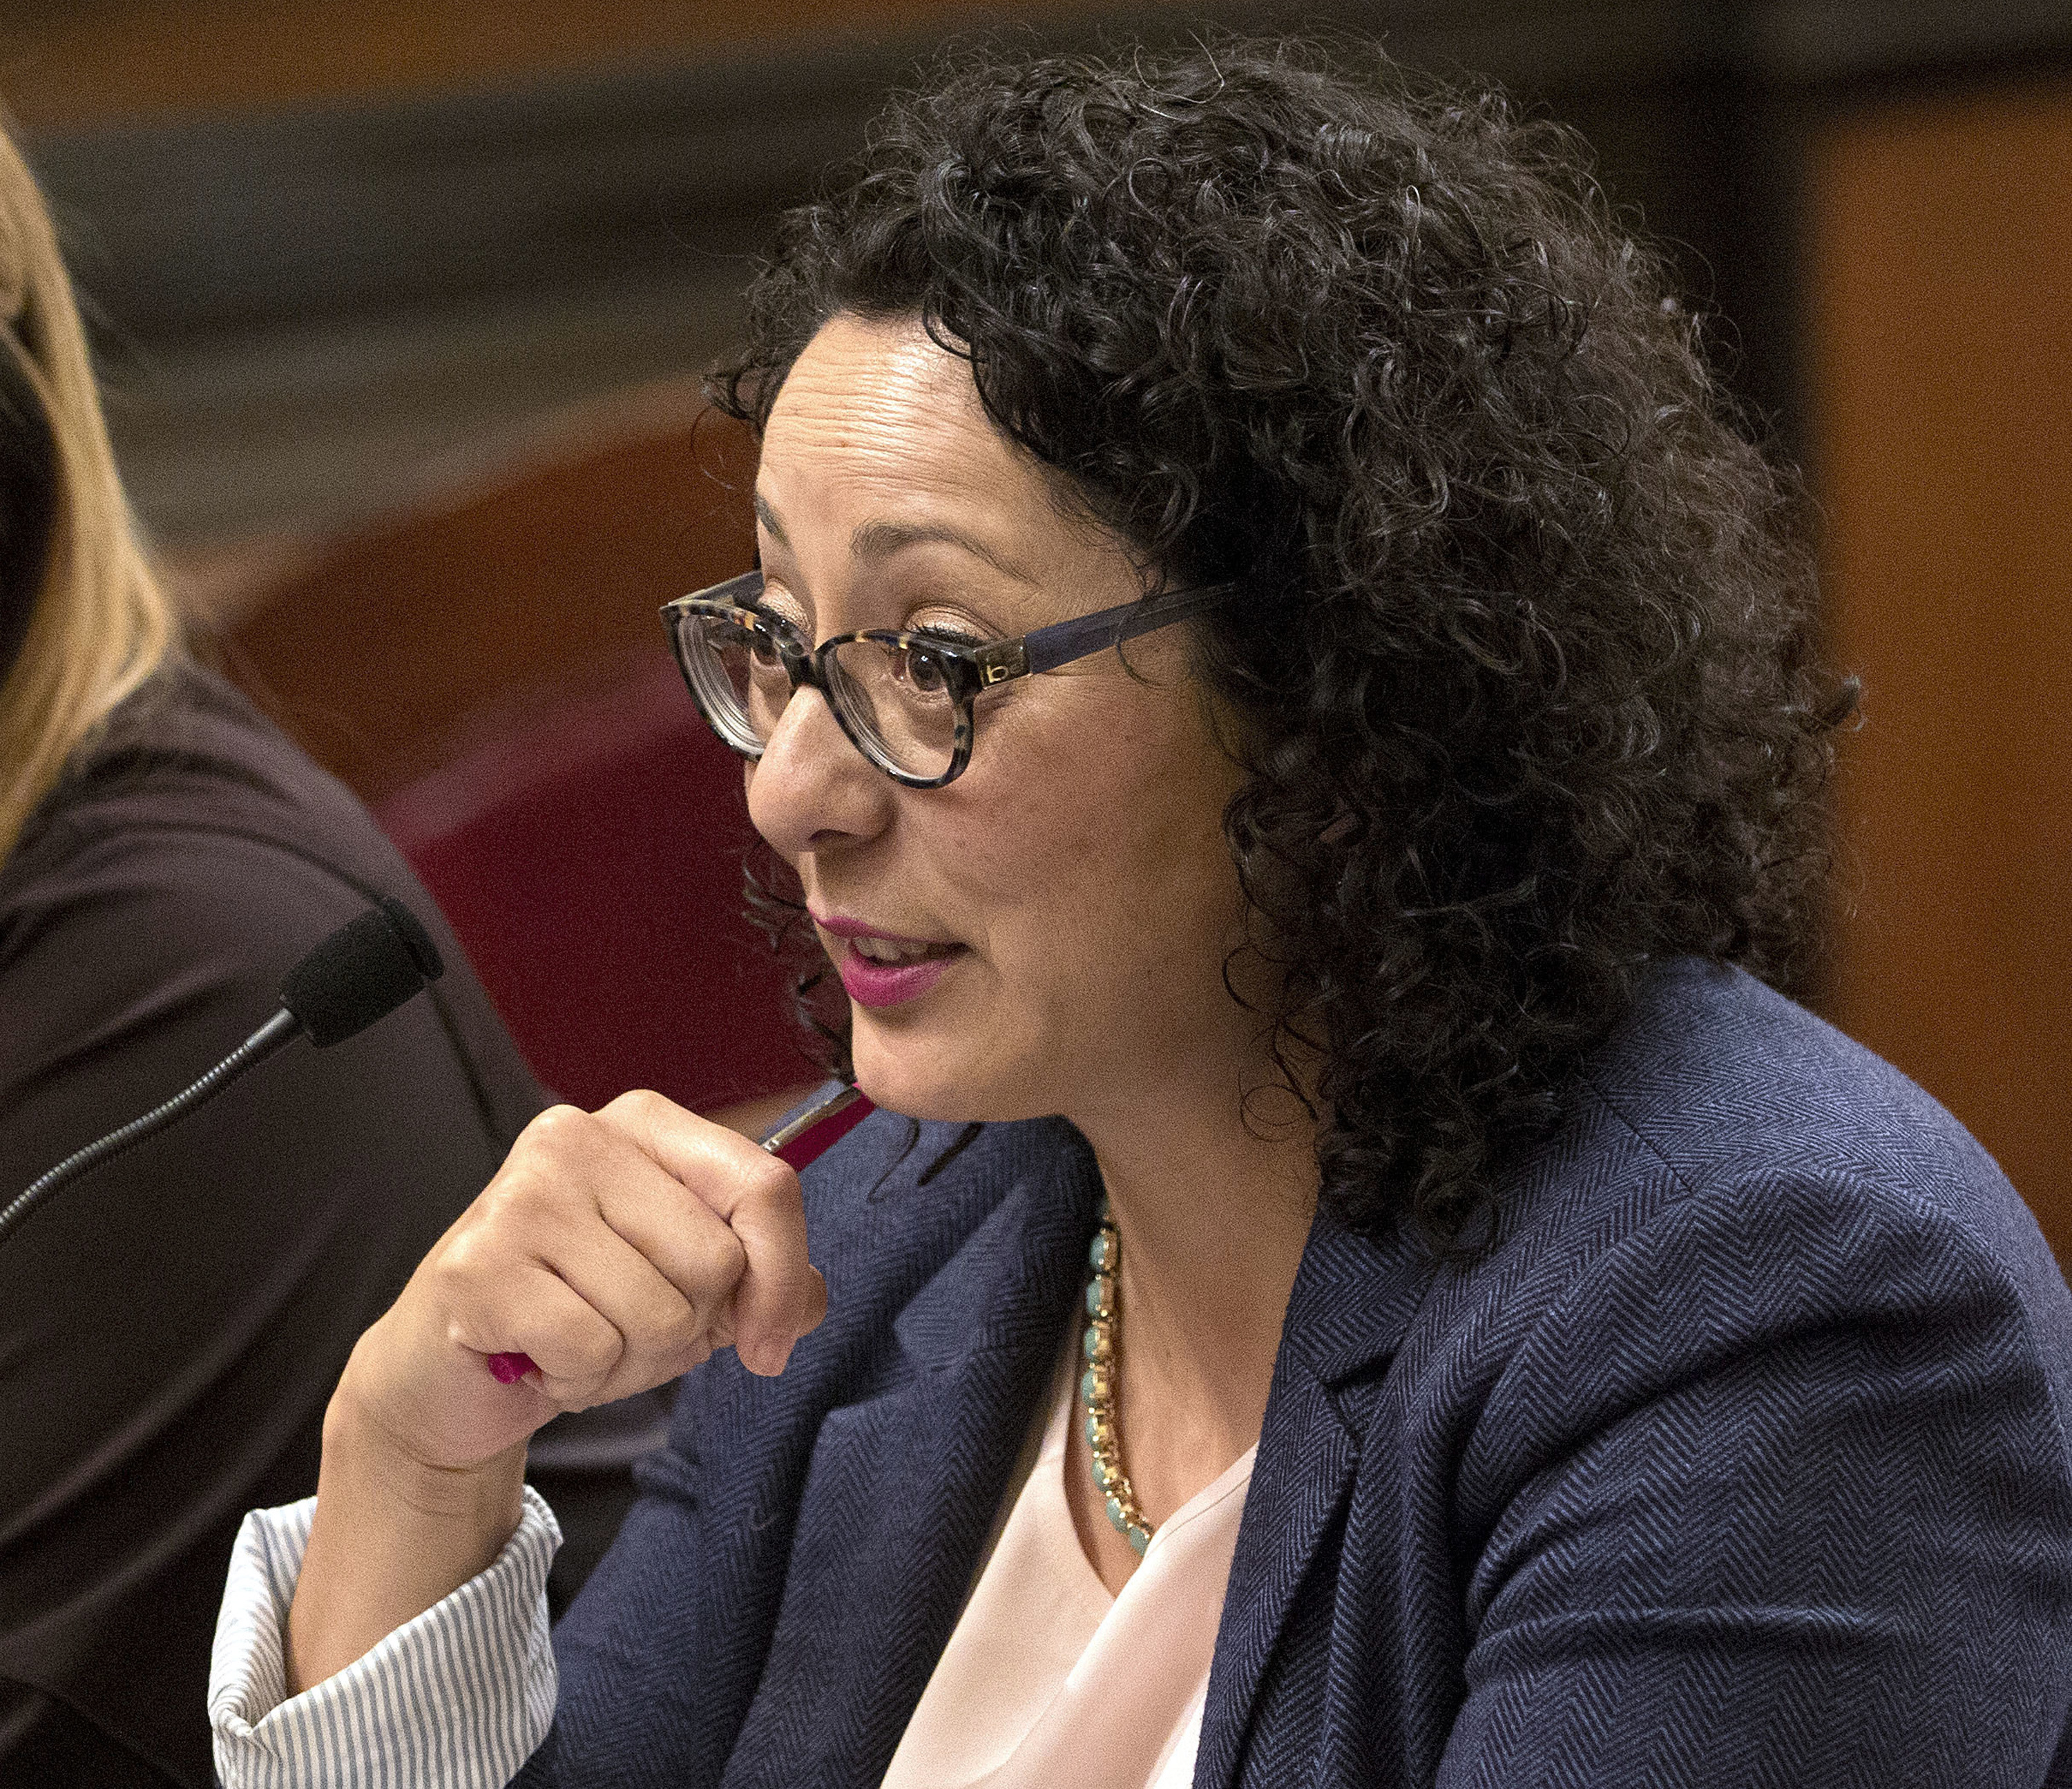 Assemblywoman Cristina Garcia, D- Bell Gardens, speaks at the Capitol in Sacramento, Calif. on June 22, 2016. (Rich Pedroncelli—AP)